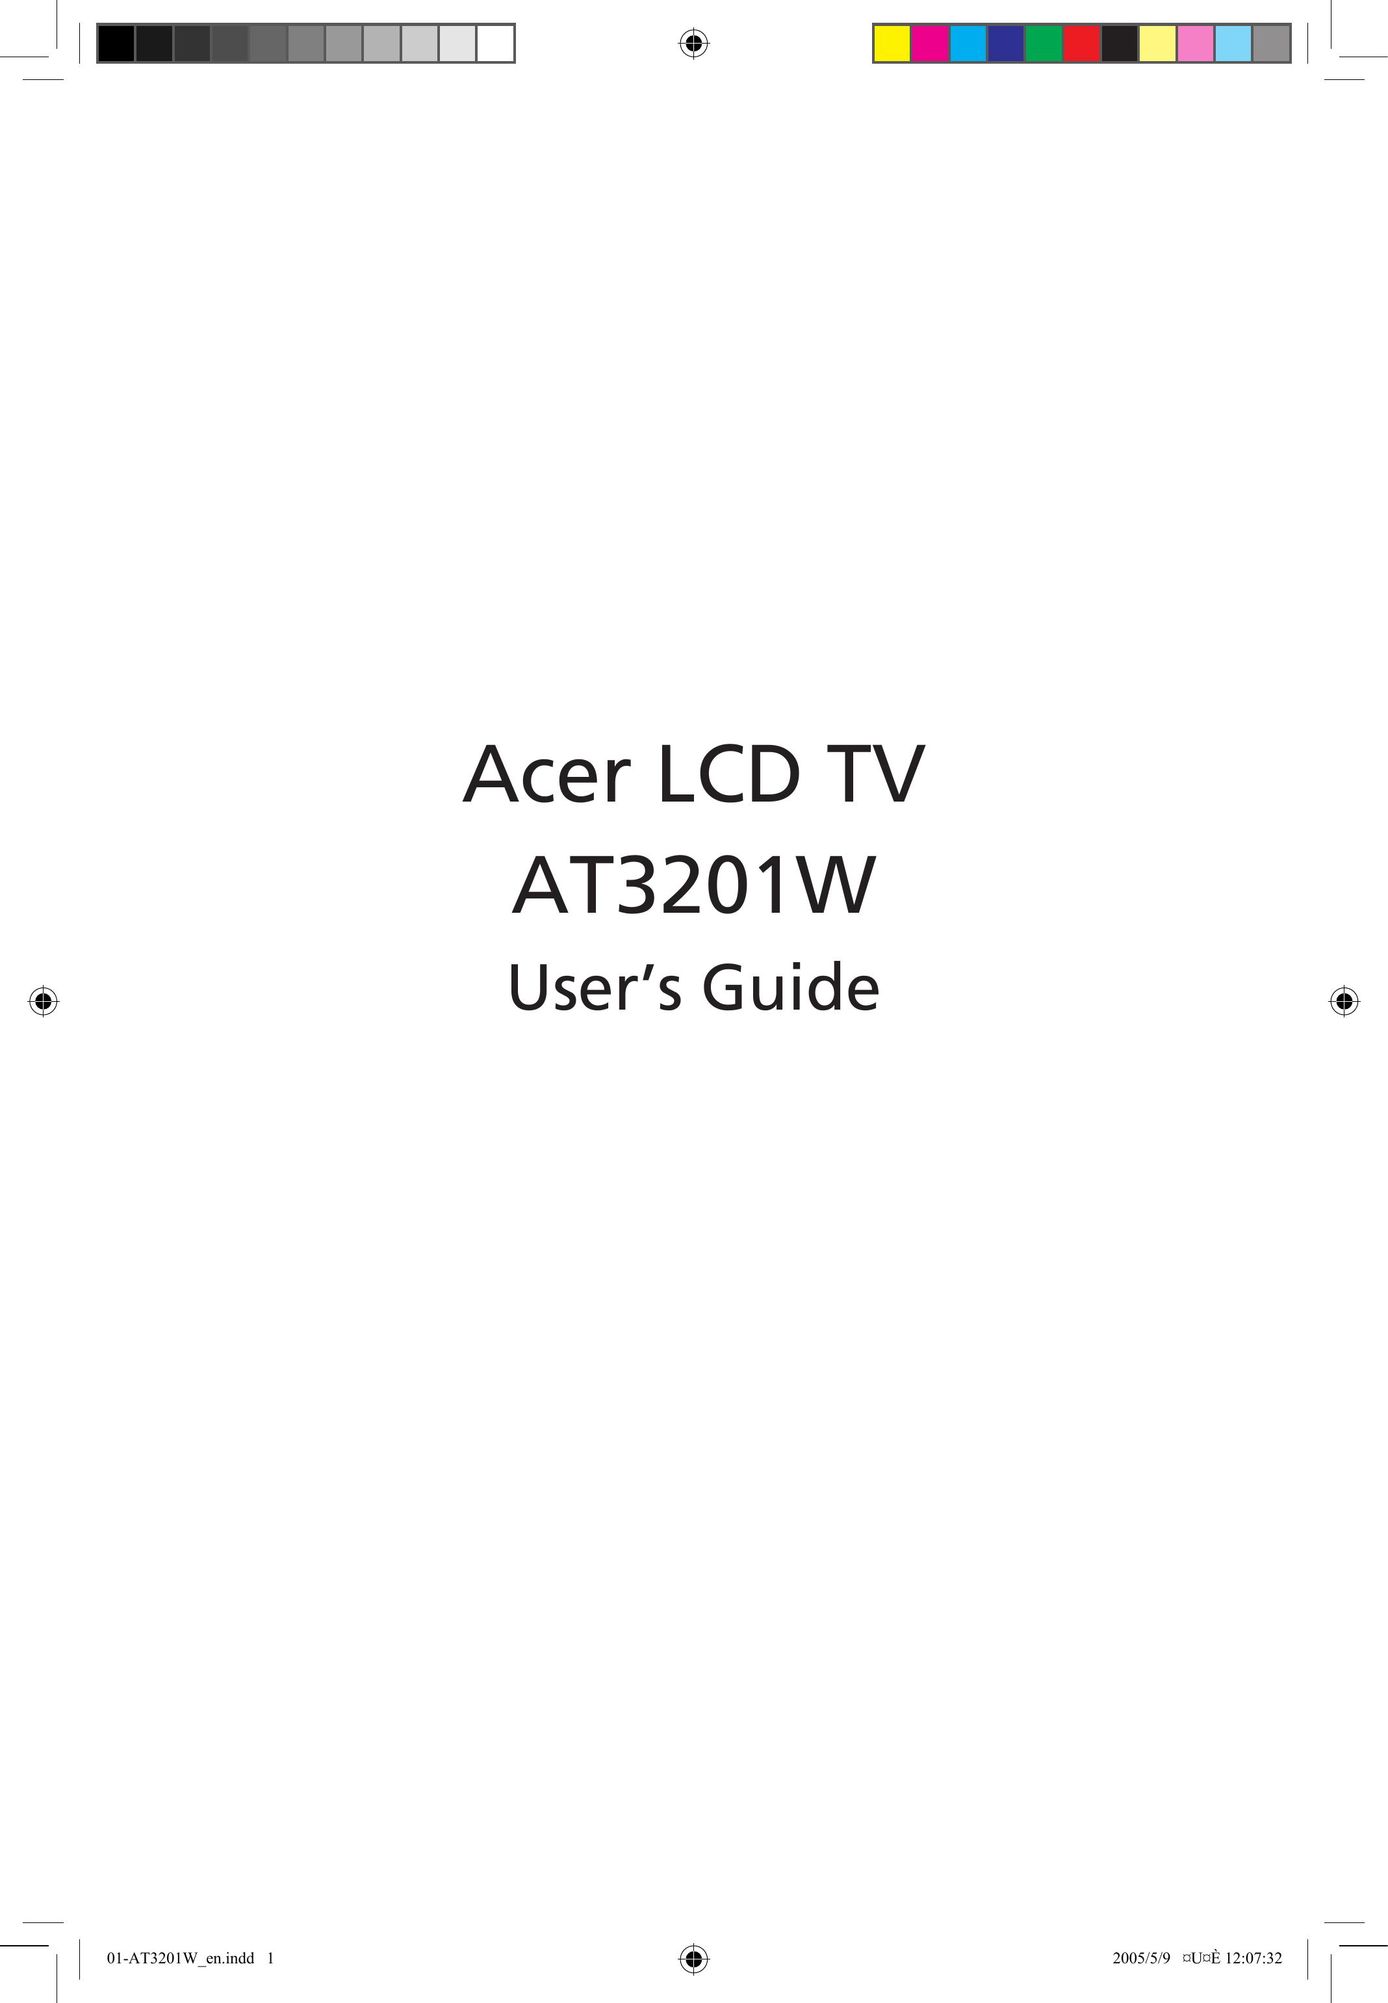 Acer AT3201W Flat Panel Television User Manual